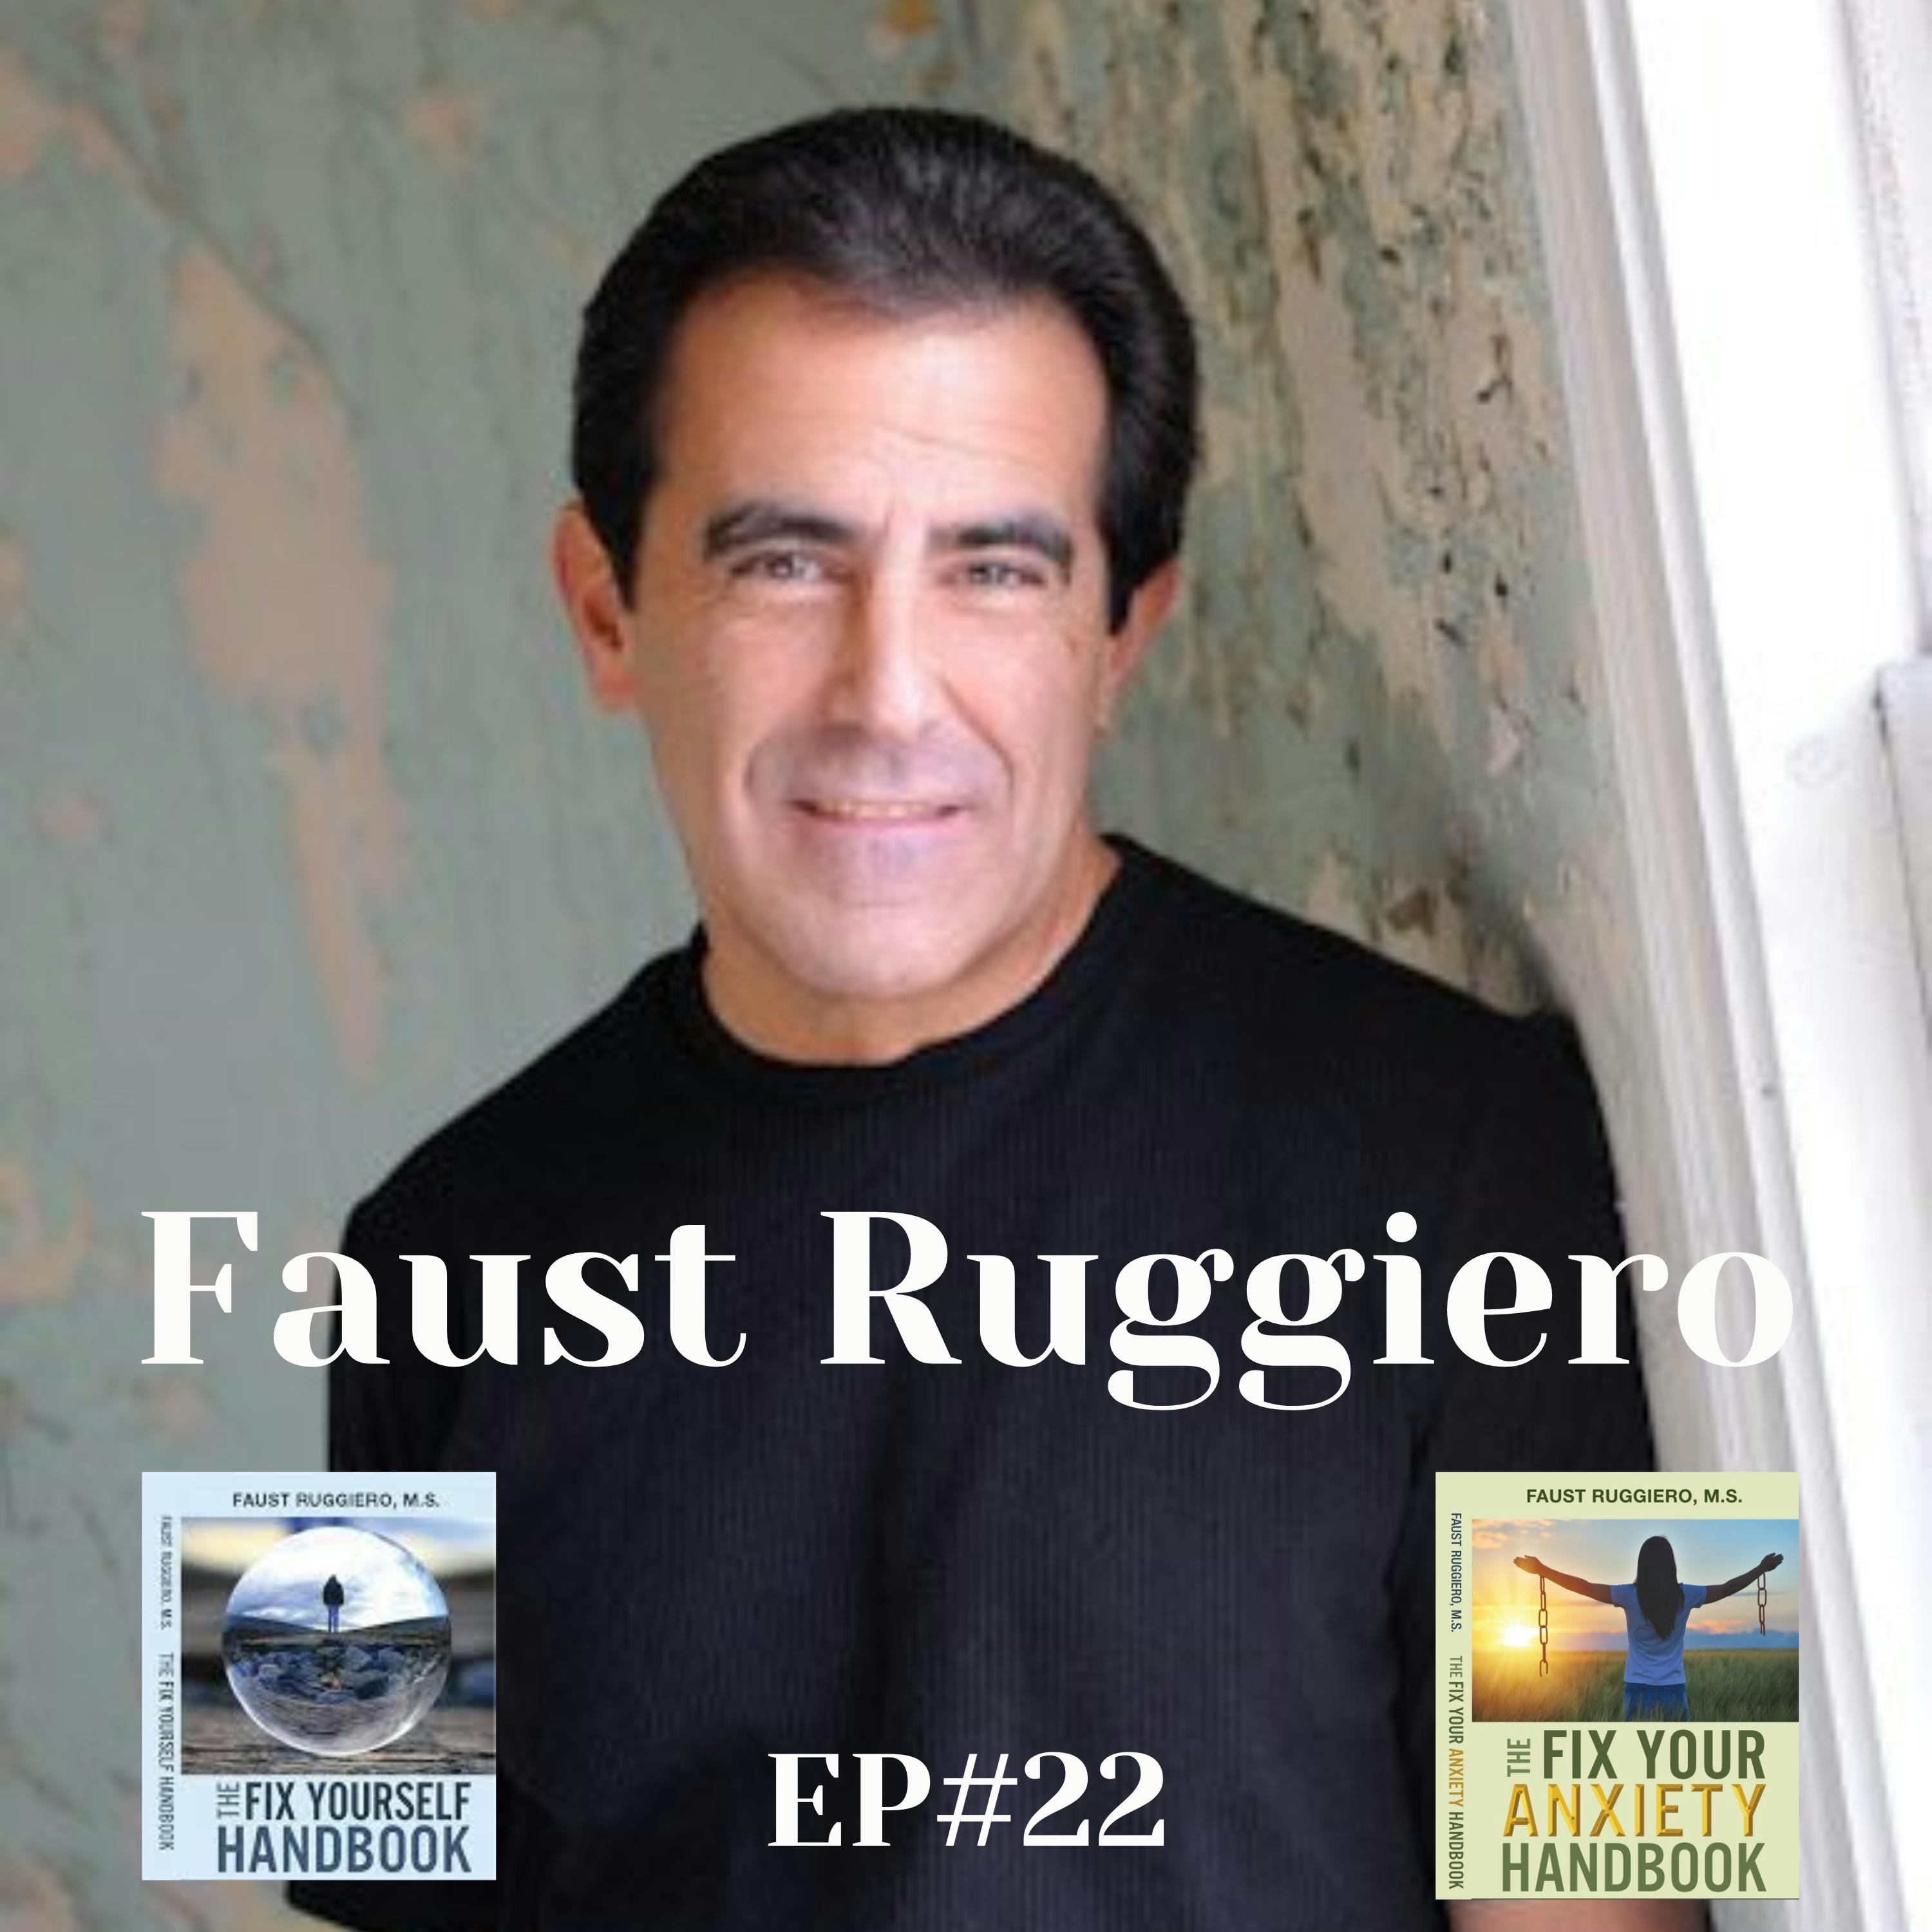 Faust Ruggiero (Author - ”The Fix Yourself” & ”The Fix Your Anxiety” Handbooks)